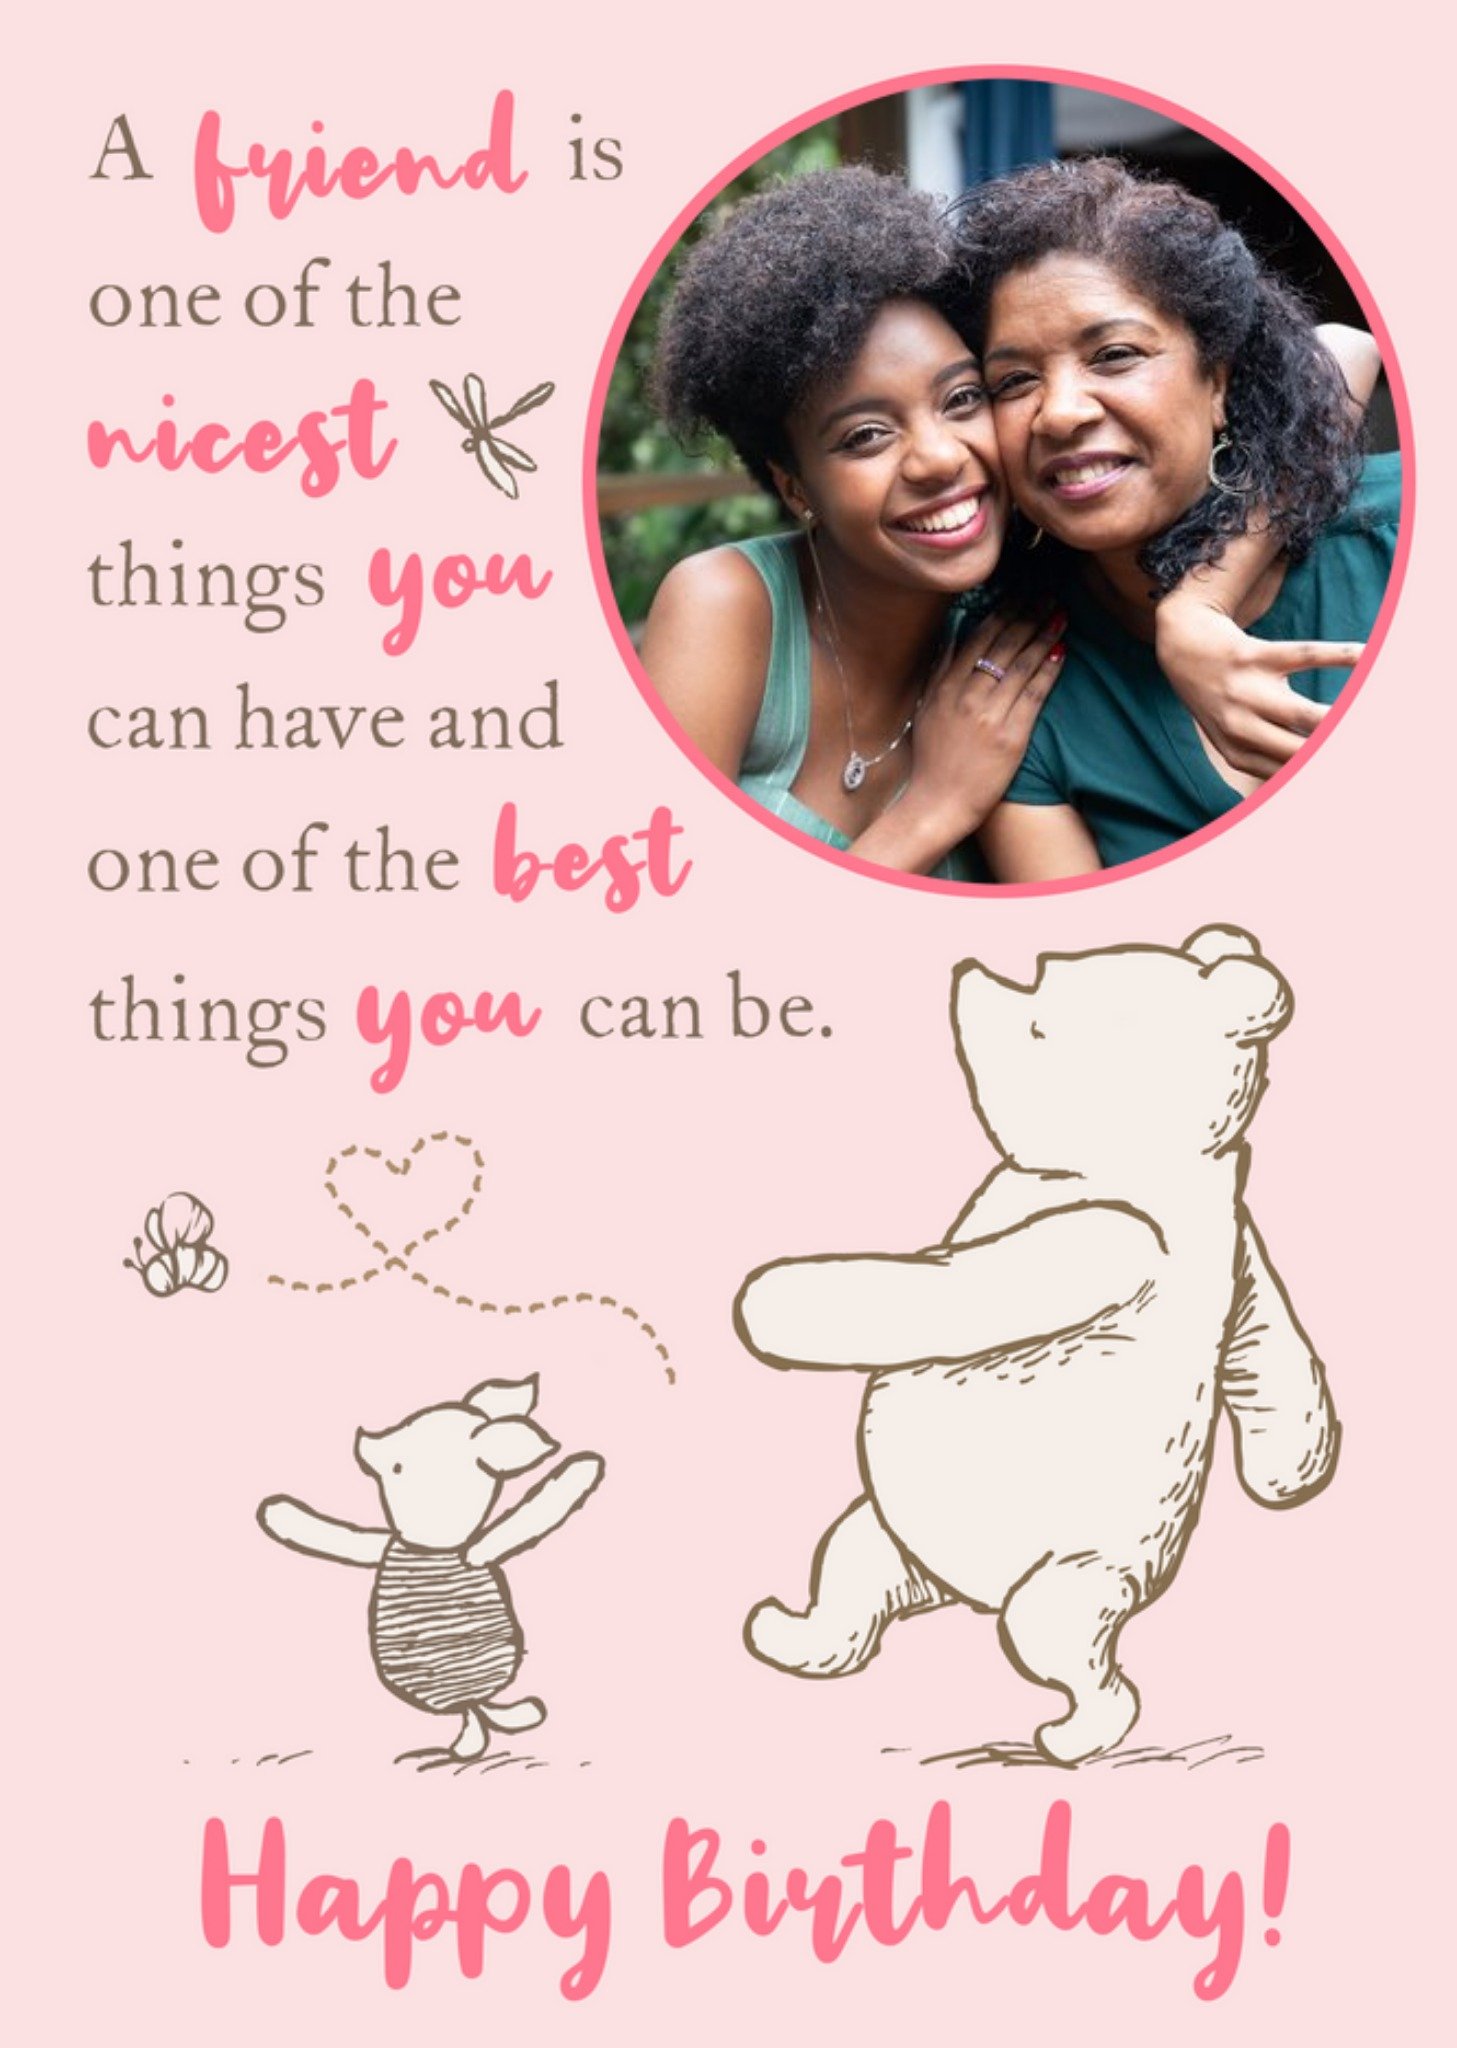 Winnie The Pooh A Friend Is One Of The Nicest Things You Can Have Photo Upload Birthday Card, Large